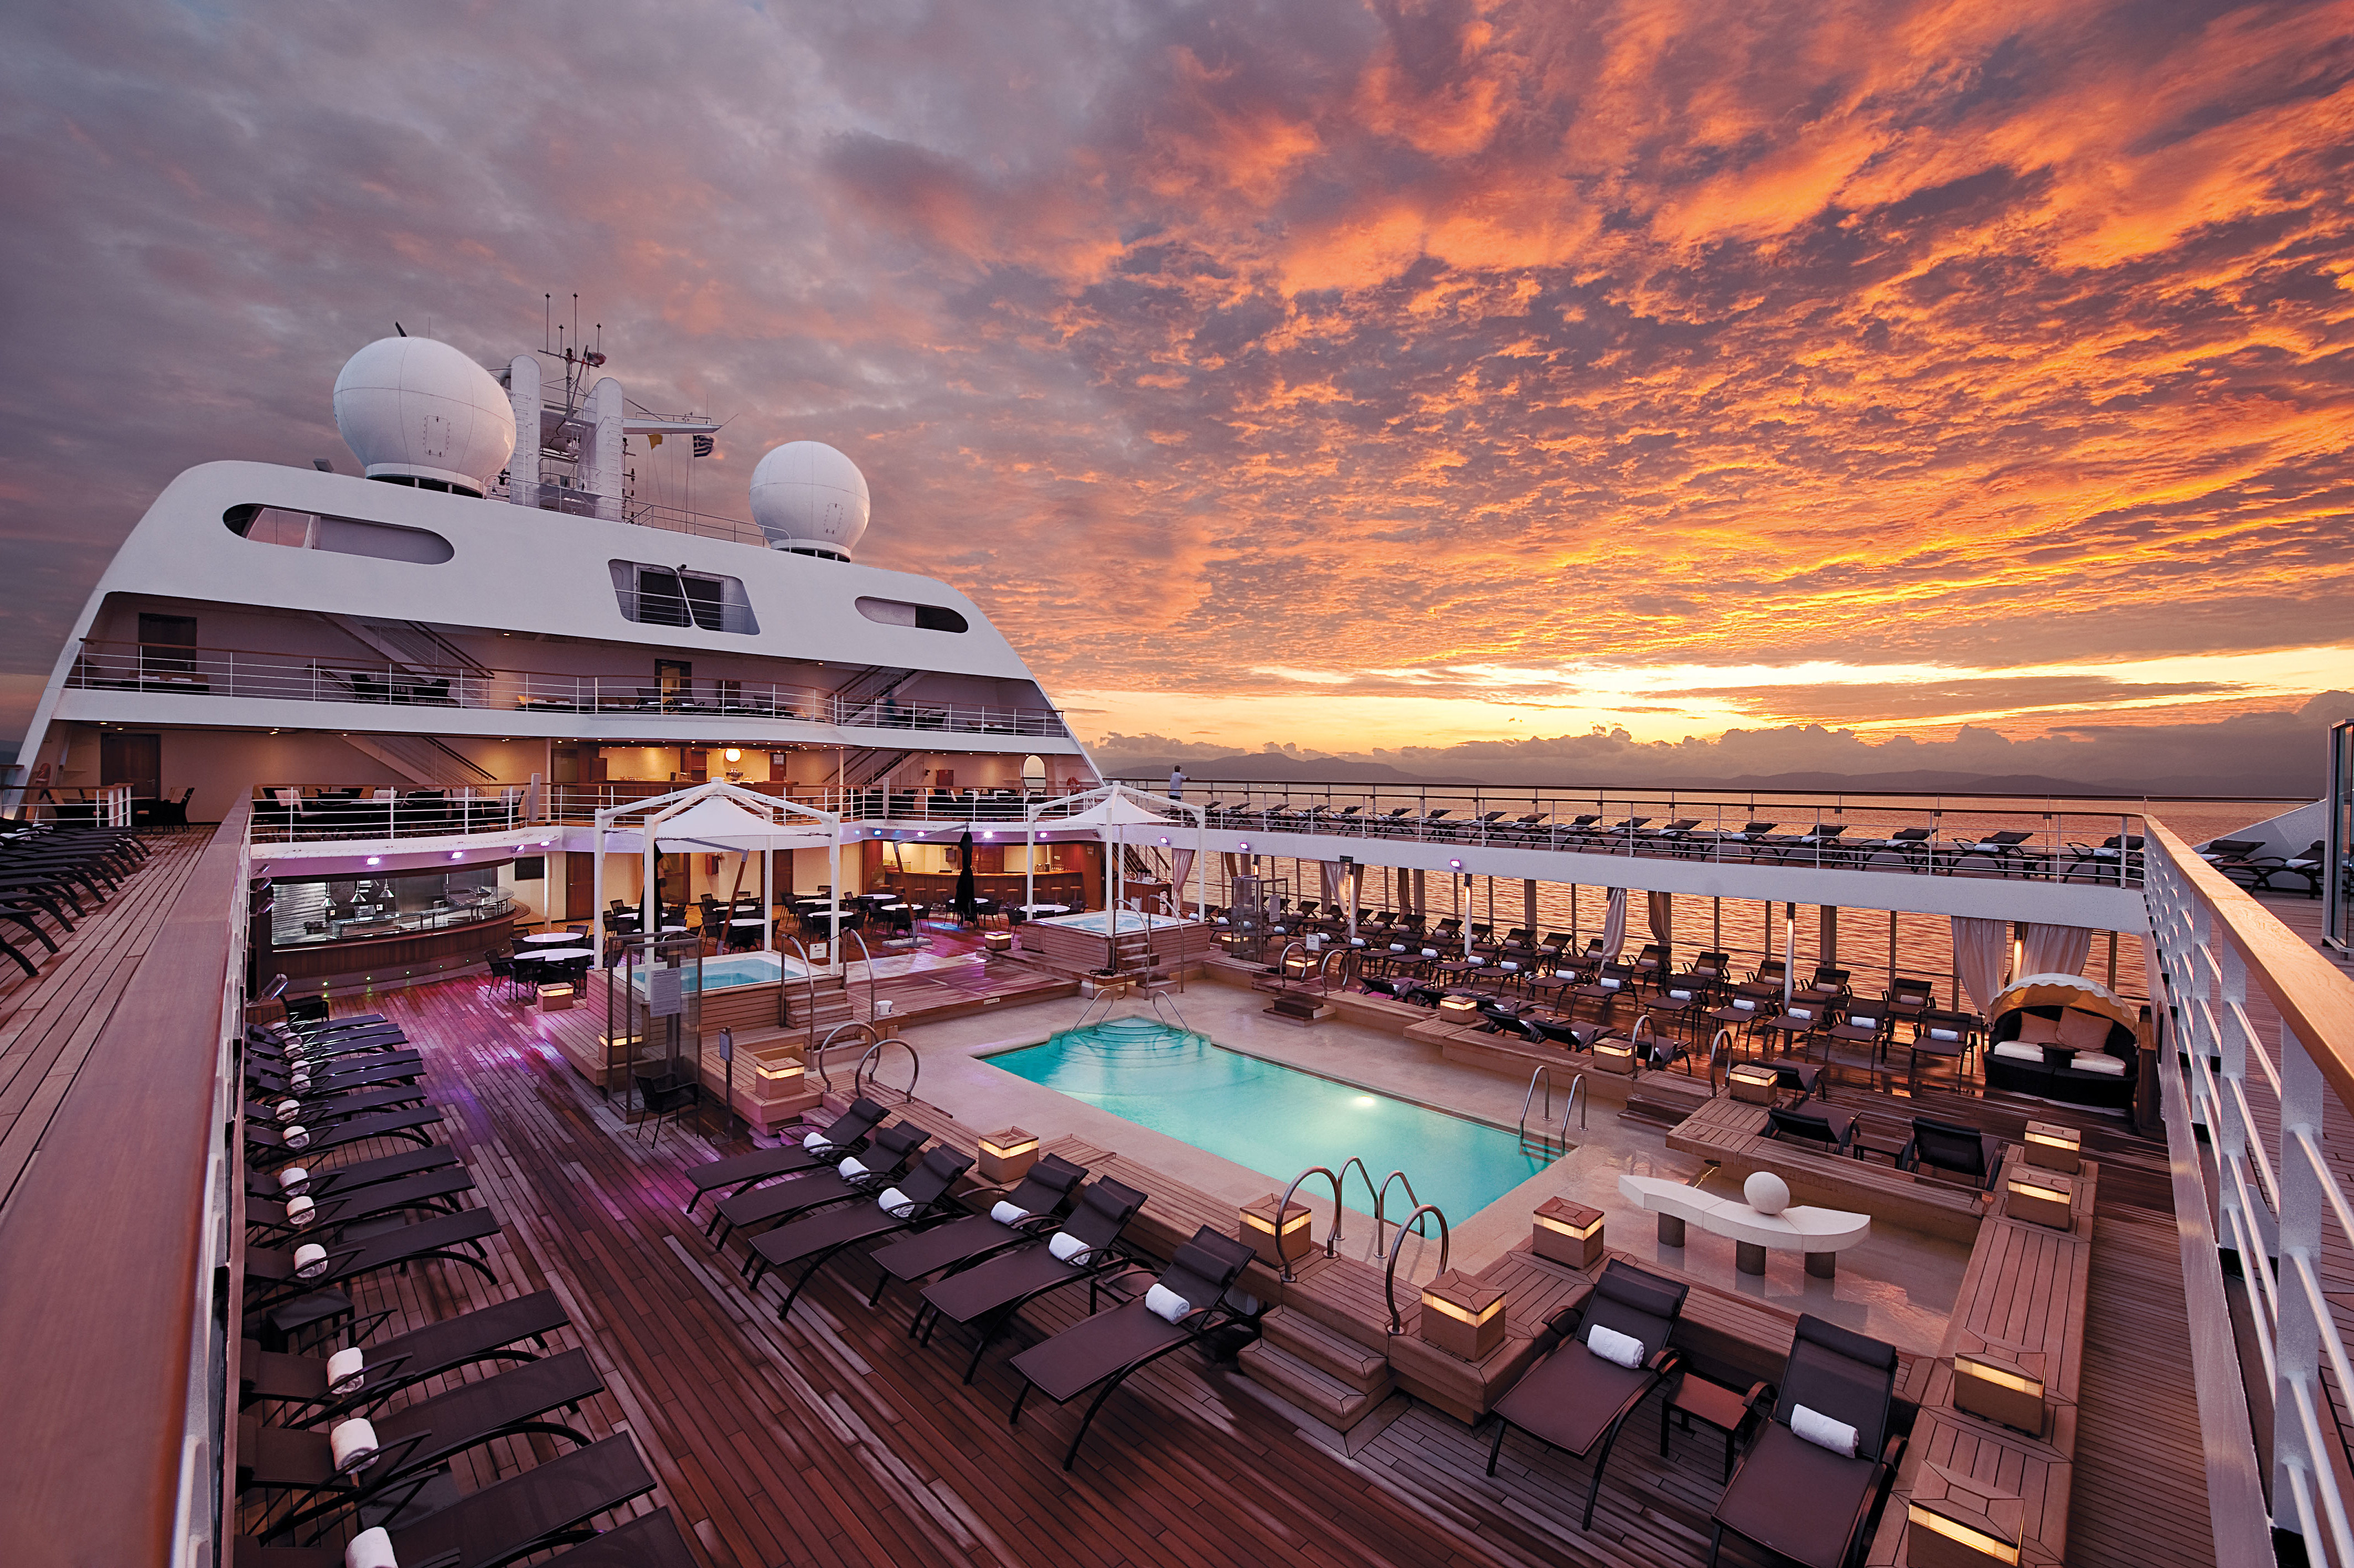 Seabourn - Pool deck at sunset